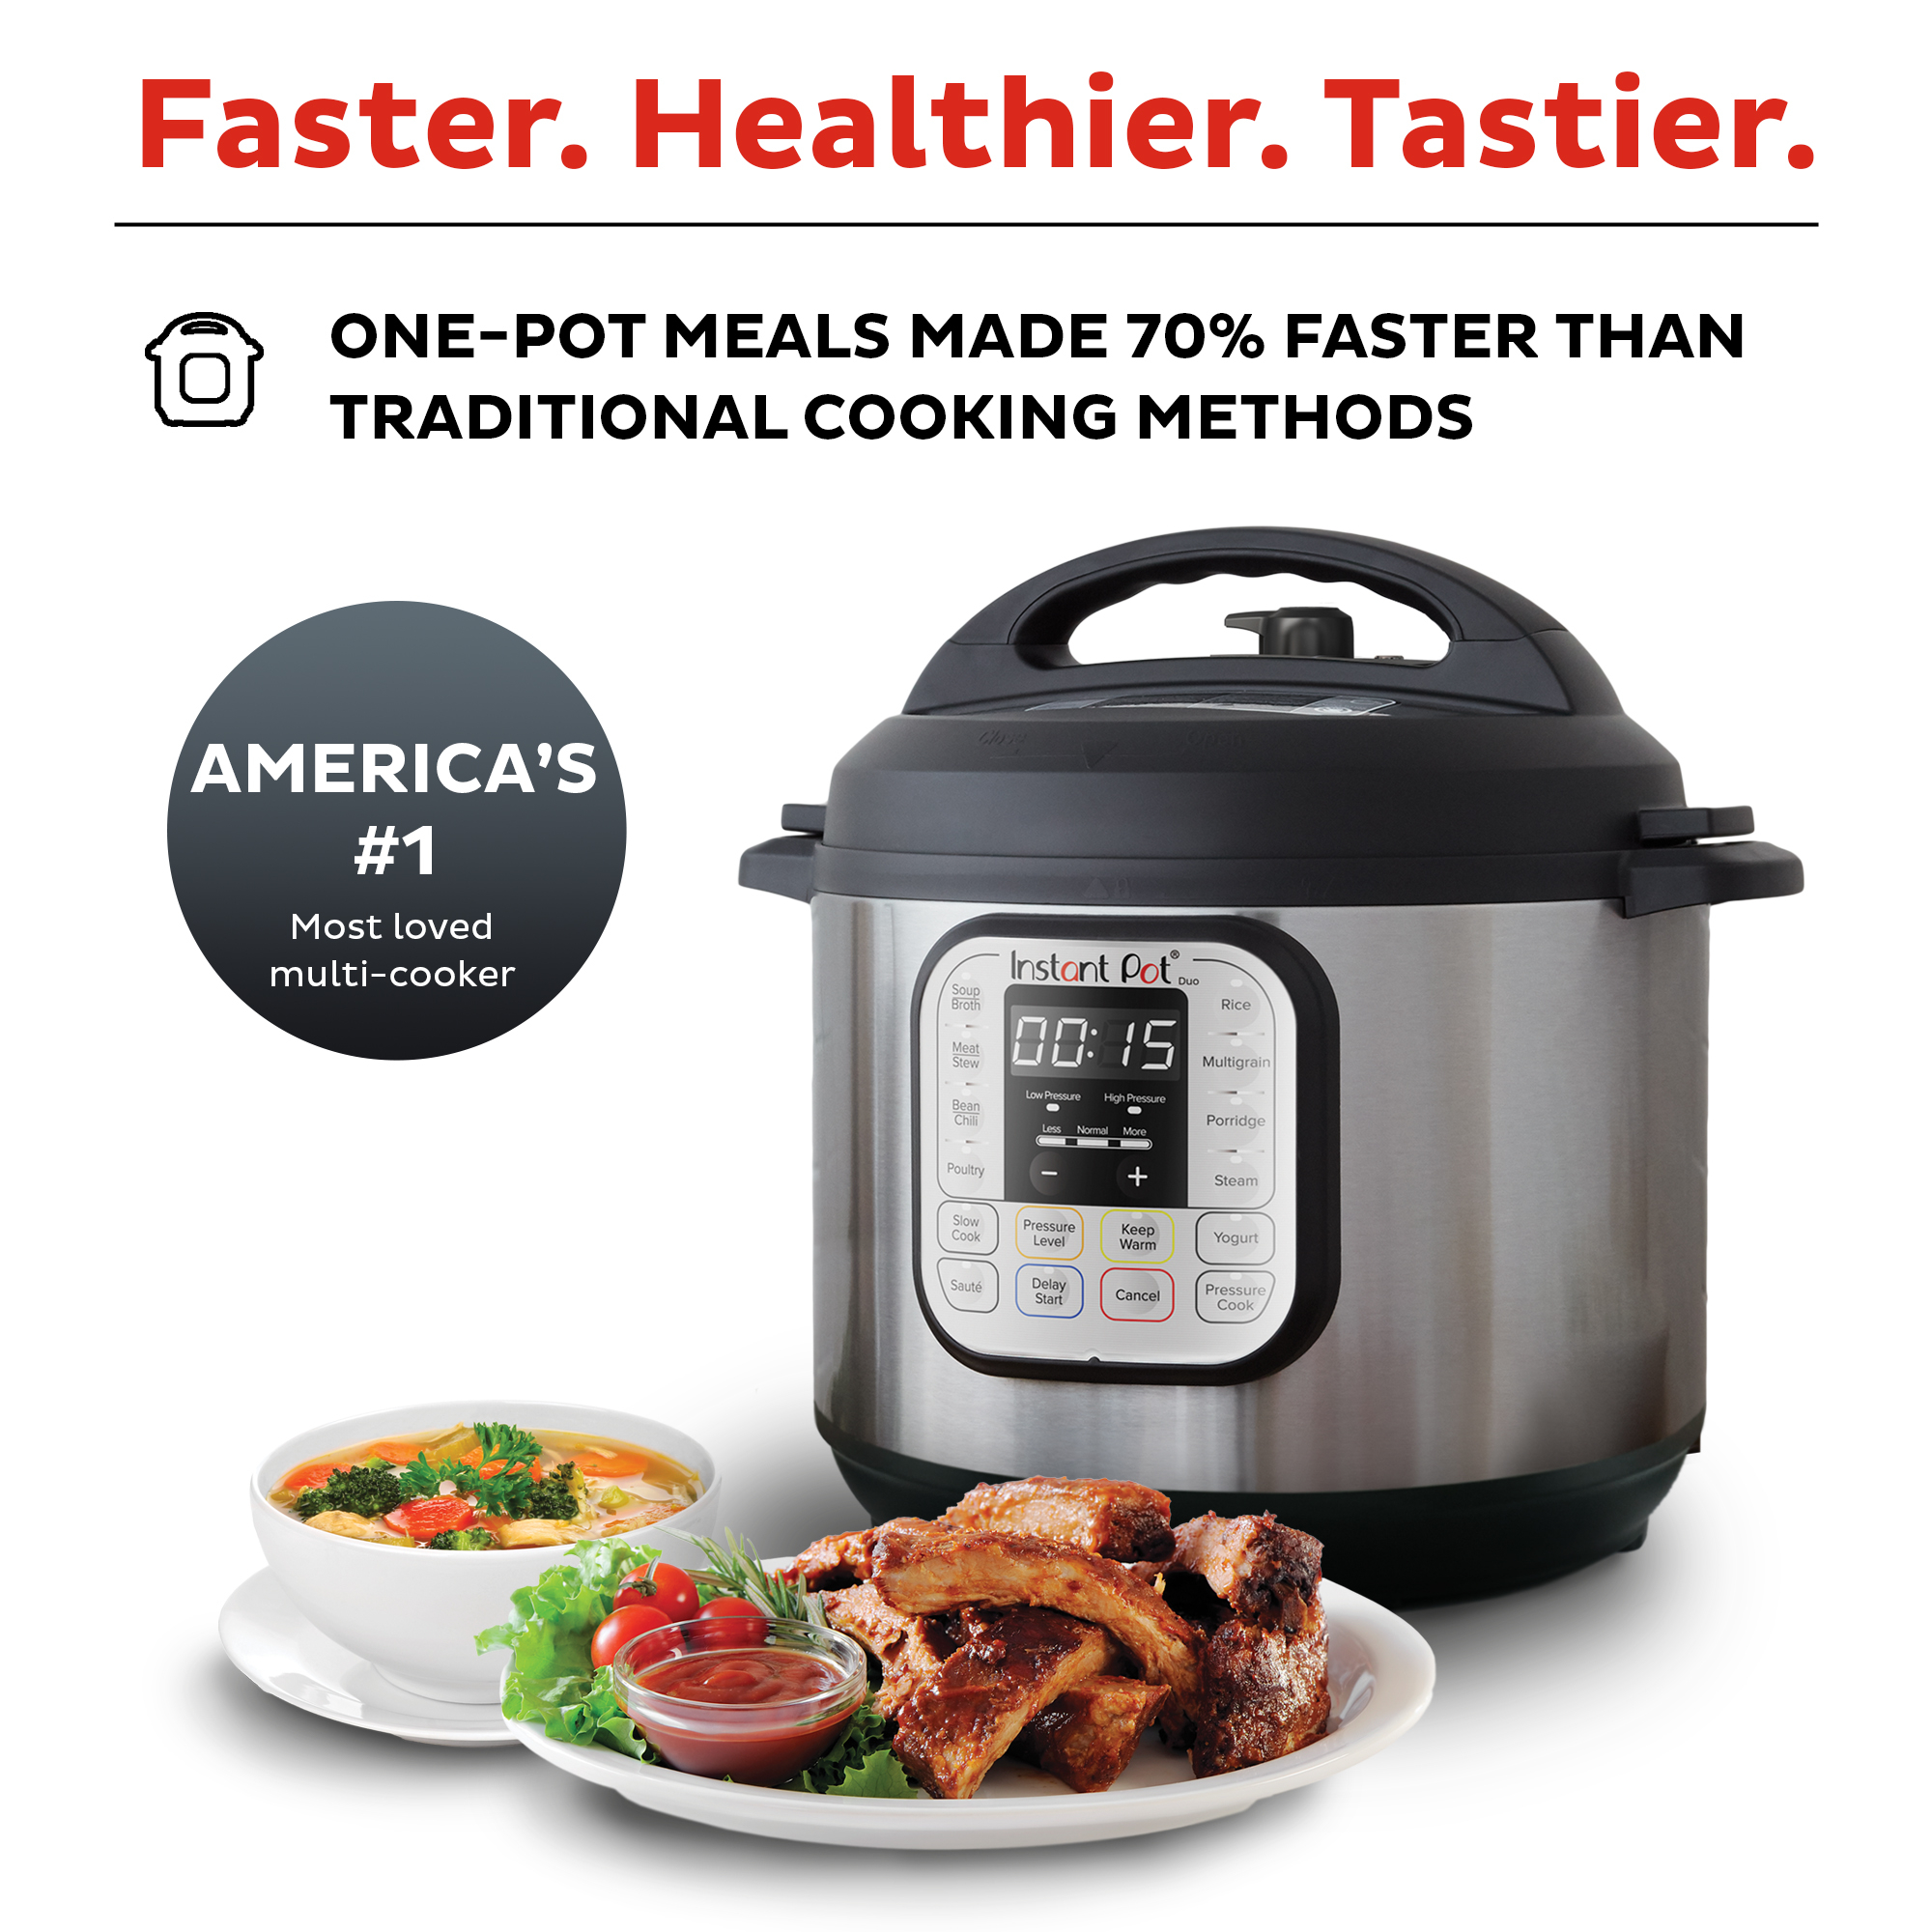 Instant Pot, 6-Quart Duo Electric Pressure Cooker, 7-in-1 Yogurt Maker, Food Steamer, Slow Cooker, Rice Cooker and More - image 3 of 9